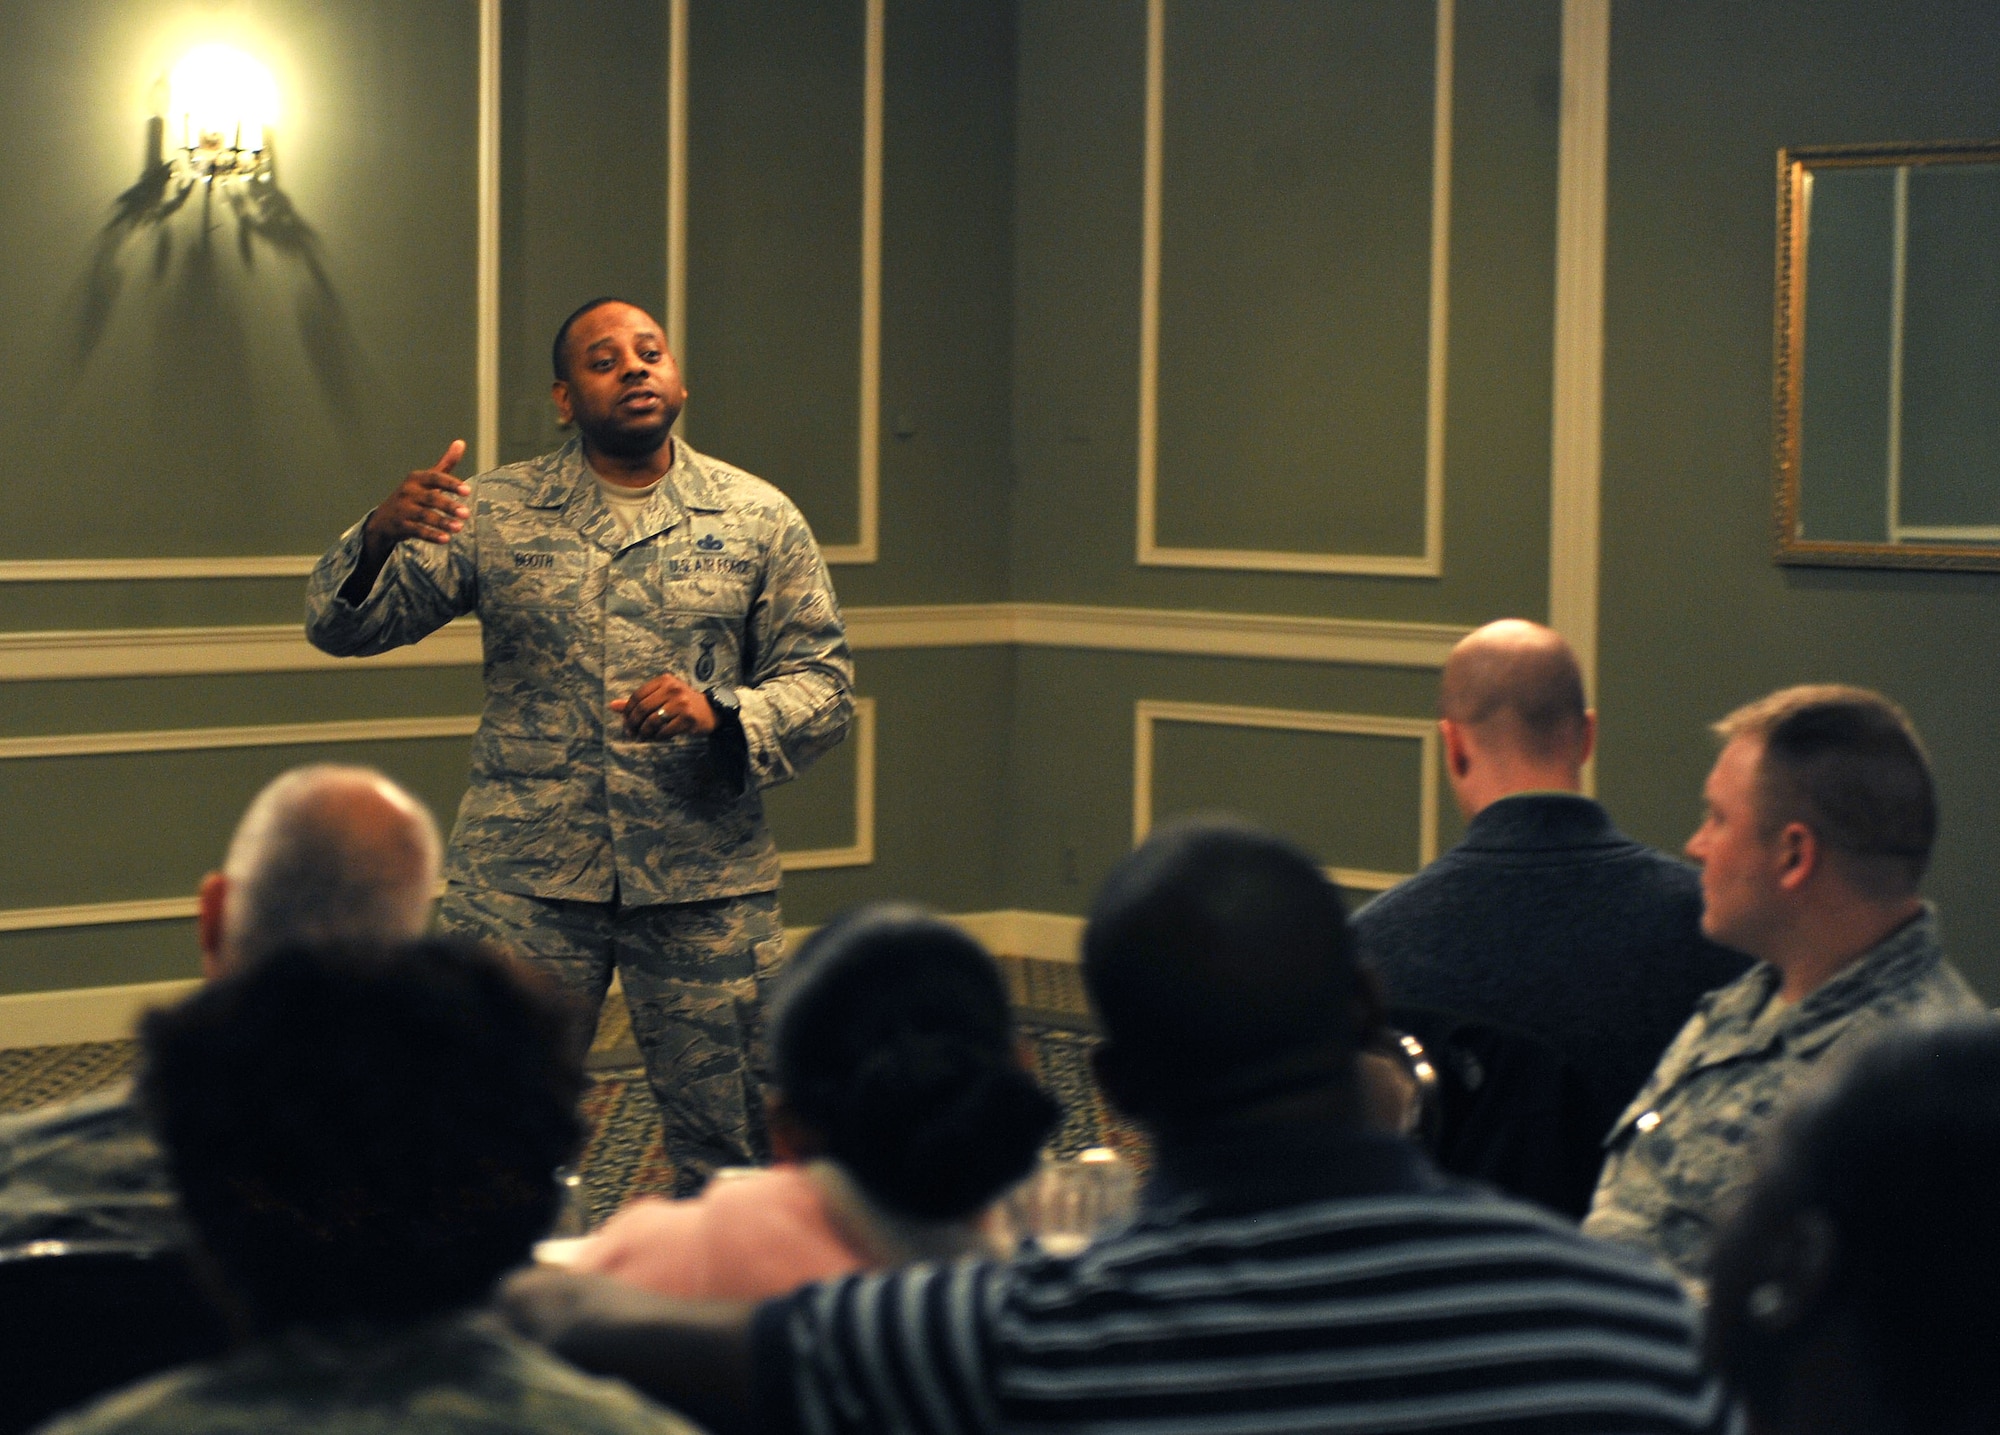 Master Sgt. Demetrius Booth, with the 55th Security Forces Squadron at Offutt Air Force Base, Neb., speaks to members of Team Offutt attending the Black History Month lunch and learn at the Patriot Club Feb. 17, 2016. The event was hosted by the Offutt Diversity Team. (U.S. Air Force photo/Senior Airman Rachel Hammes)